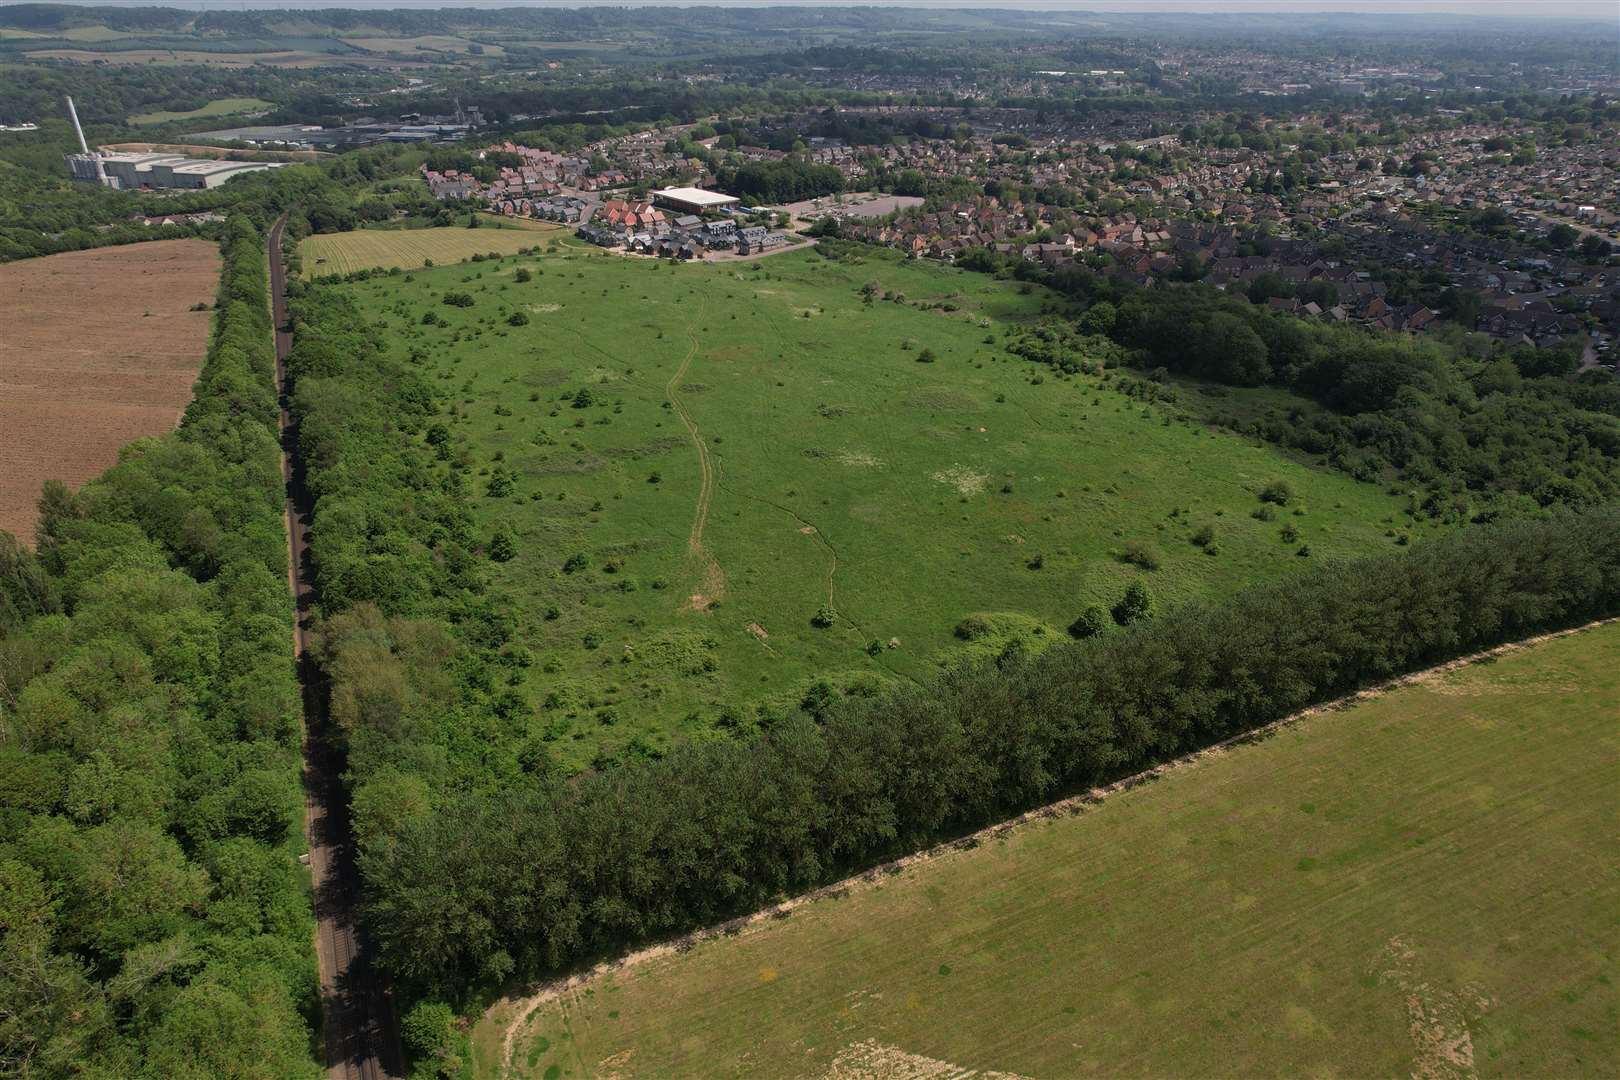 This green field off Beaver Road in Allington is earmarked for 425new homes